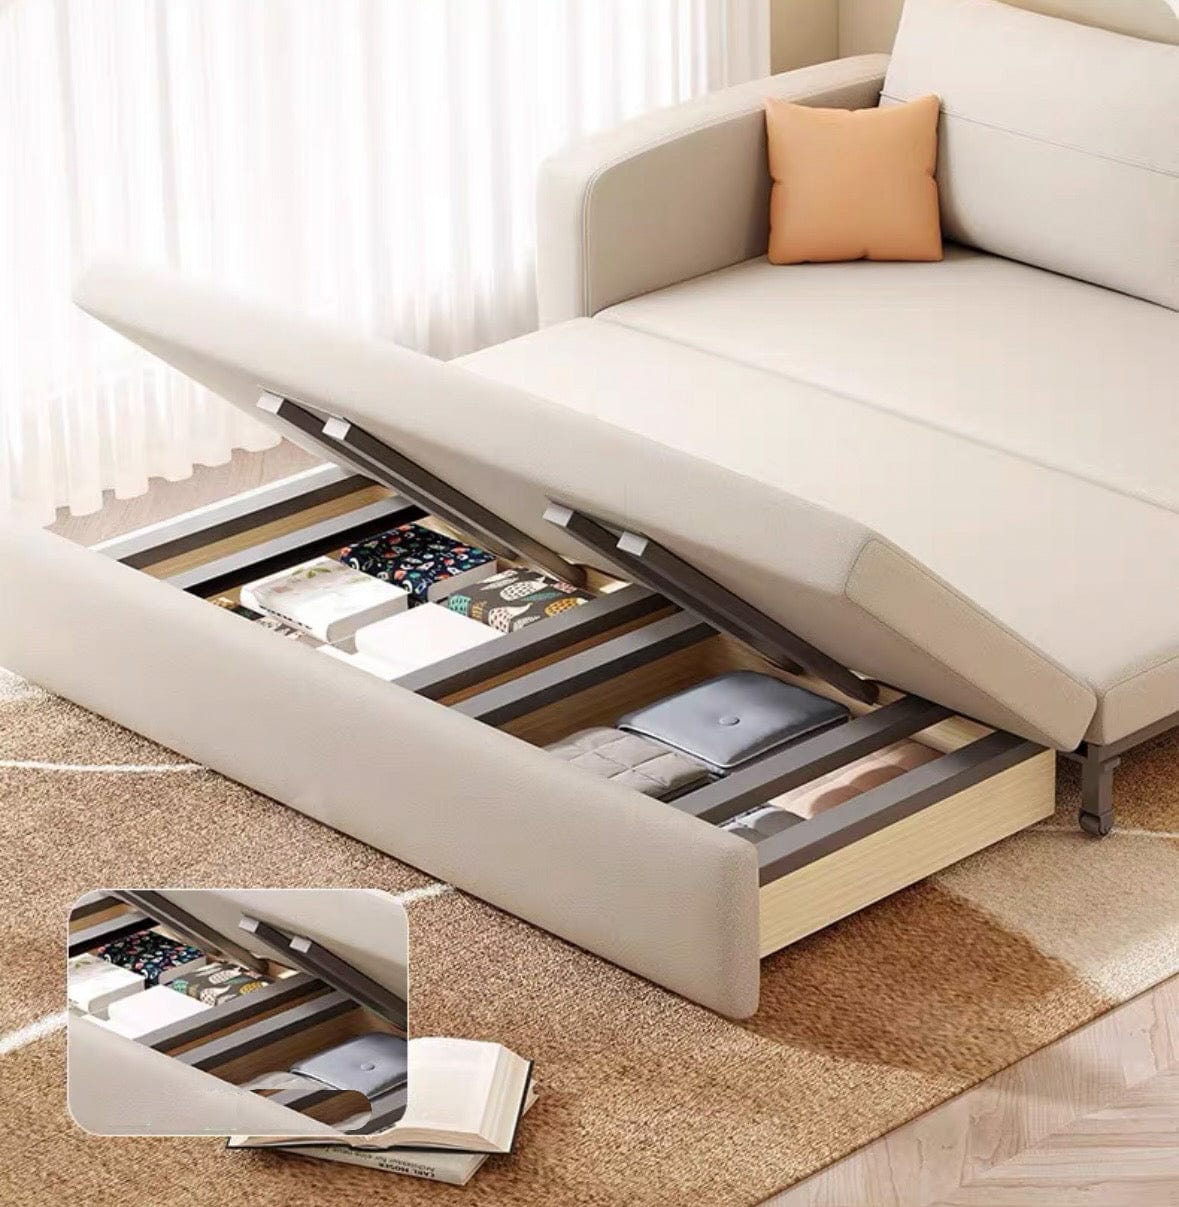 Home Atelier Angie Storage Sofa Bed